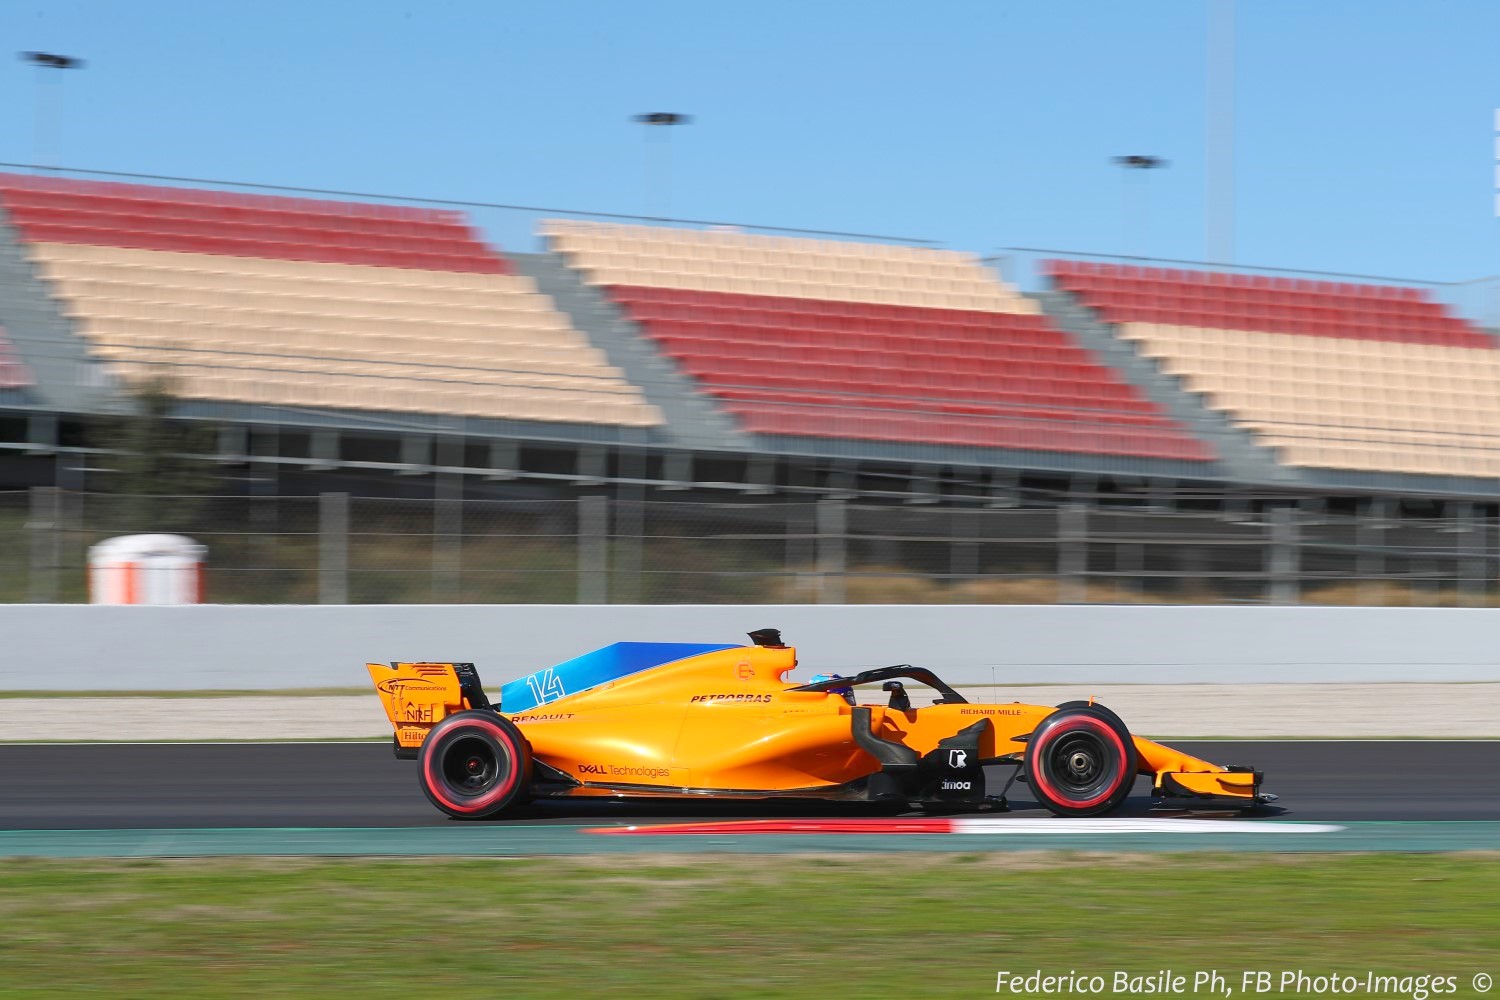 Those blank sidepods on the new McLaren would be a good place for a towing company to advertise